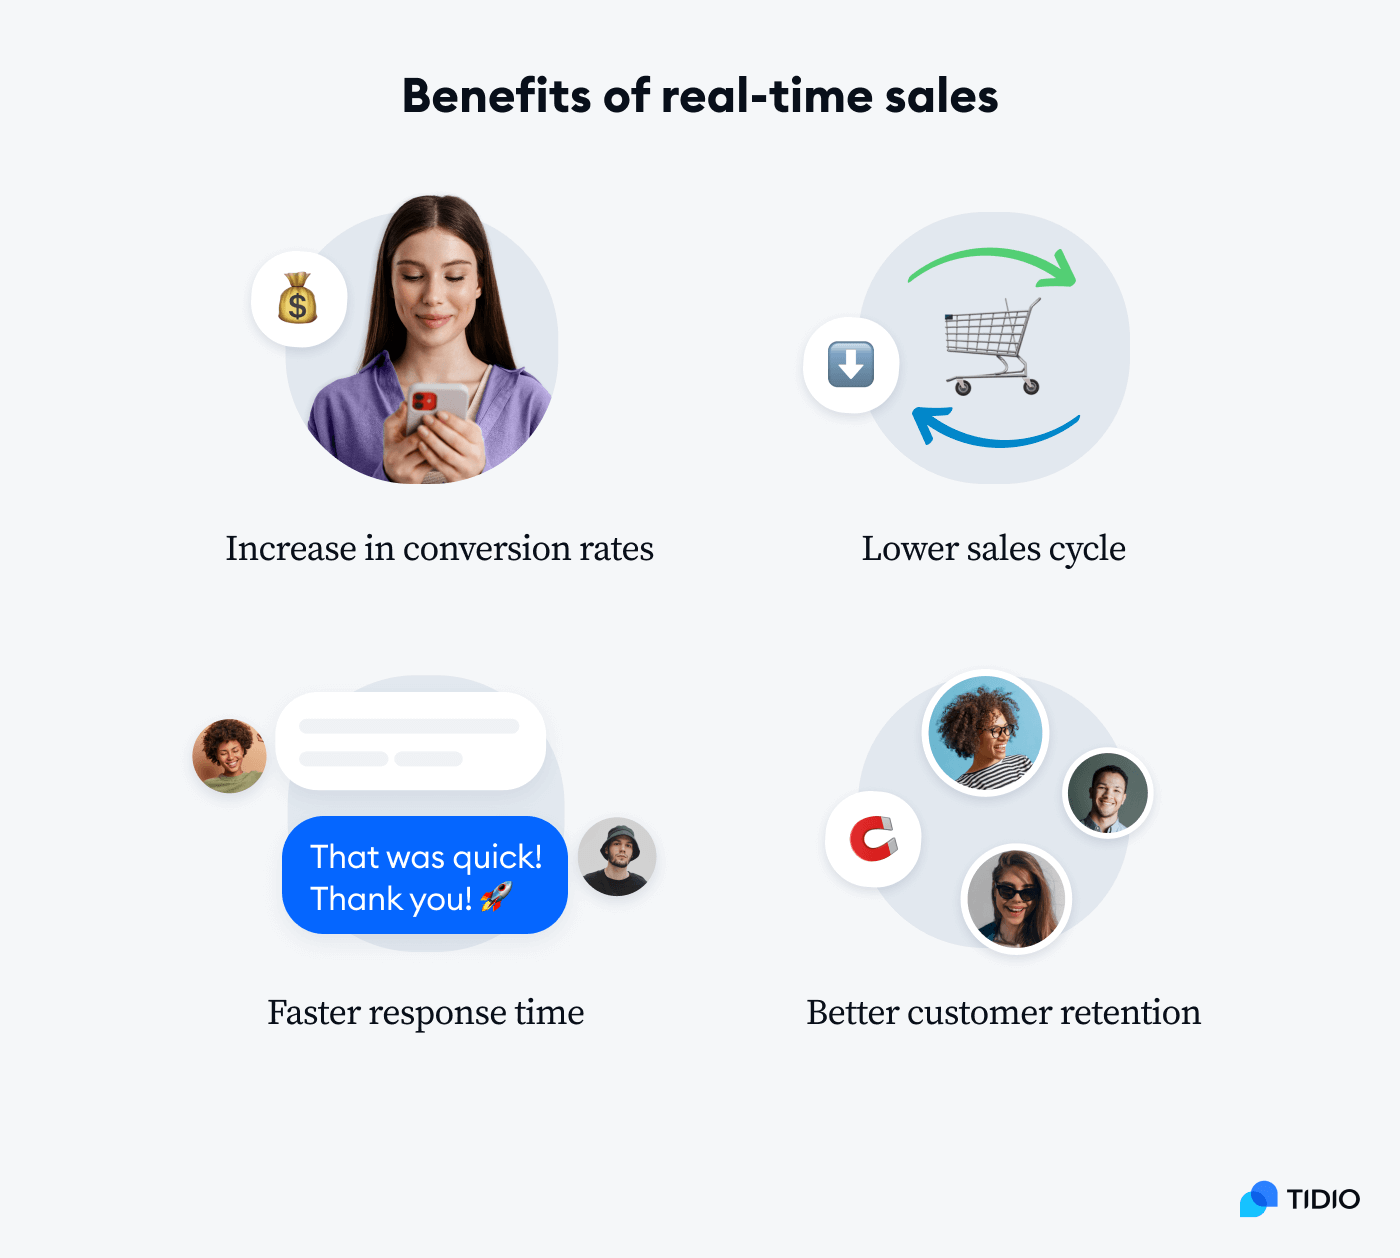 benefits of real time sales on image